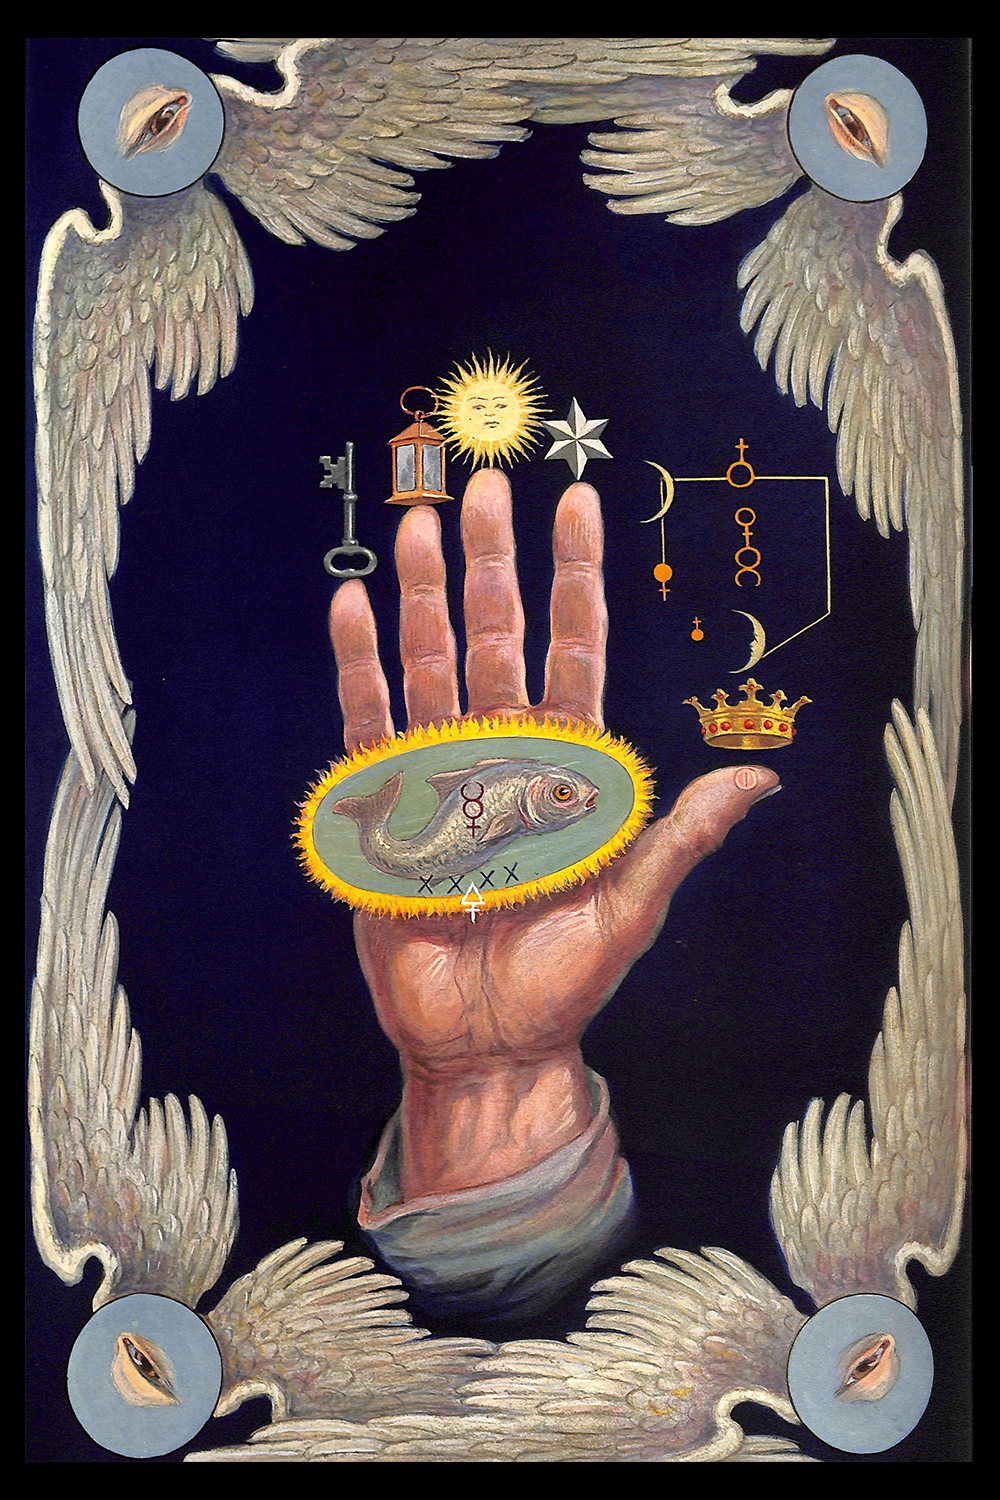 PLATE 14: Hand of the Mysteries